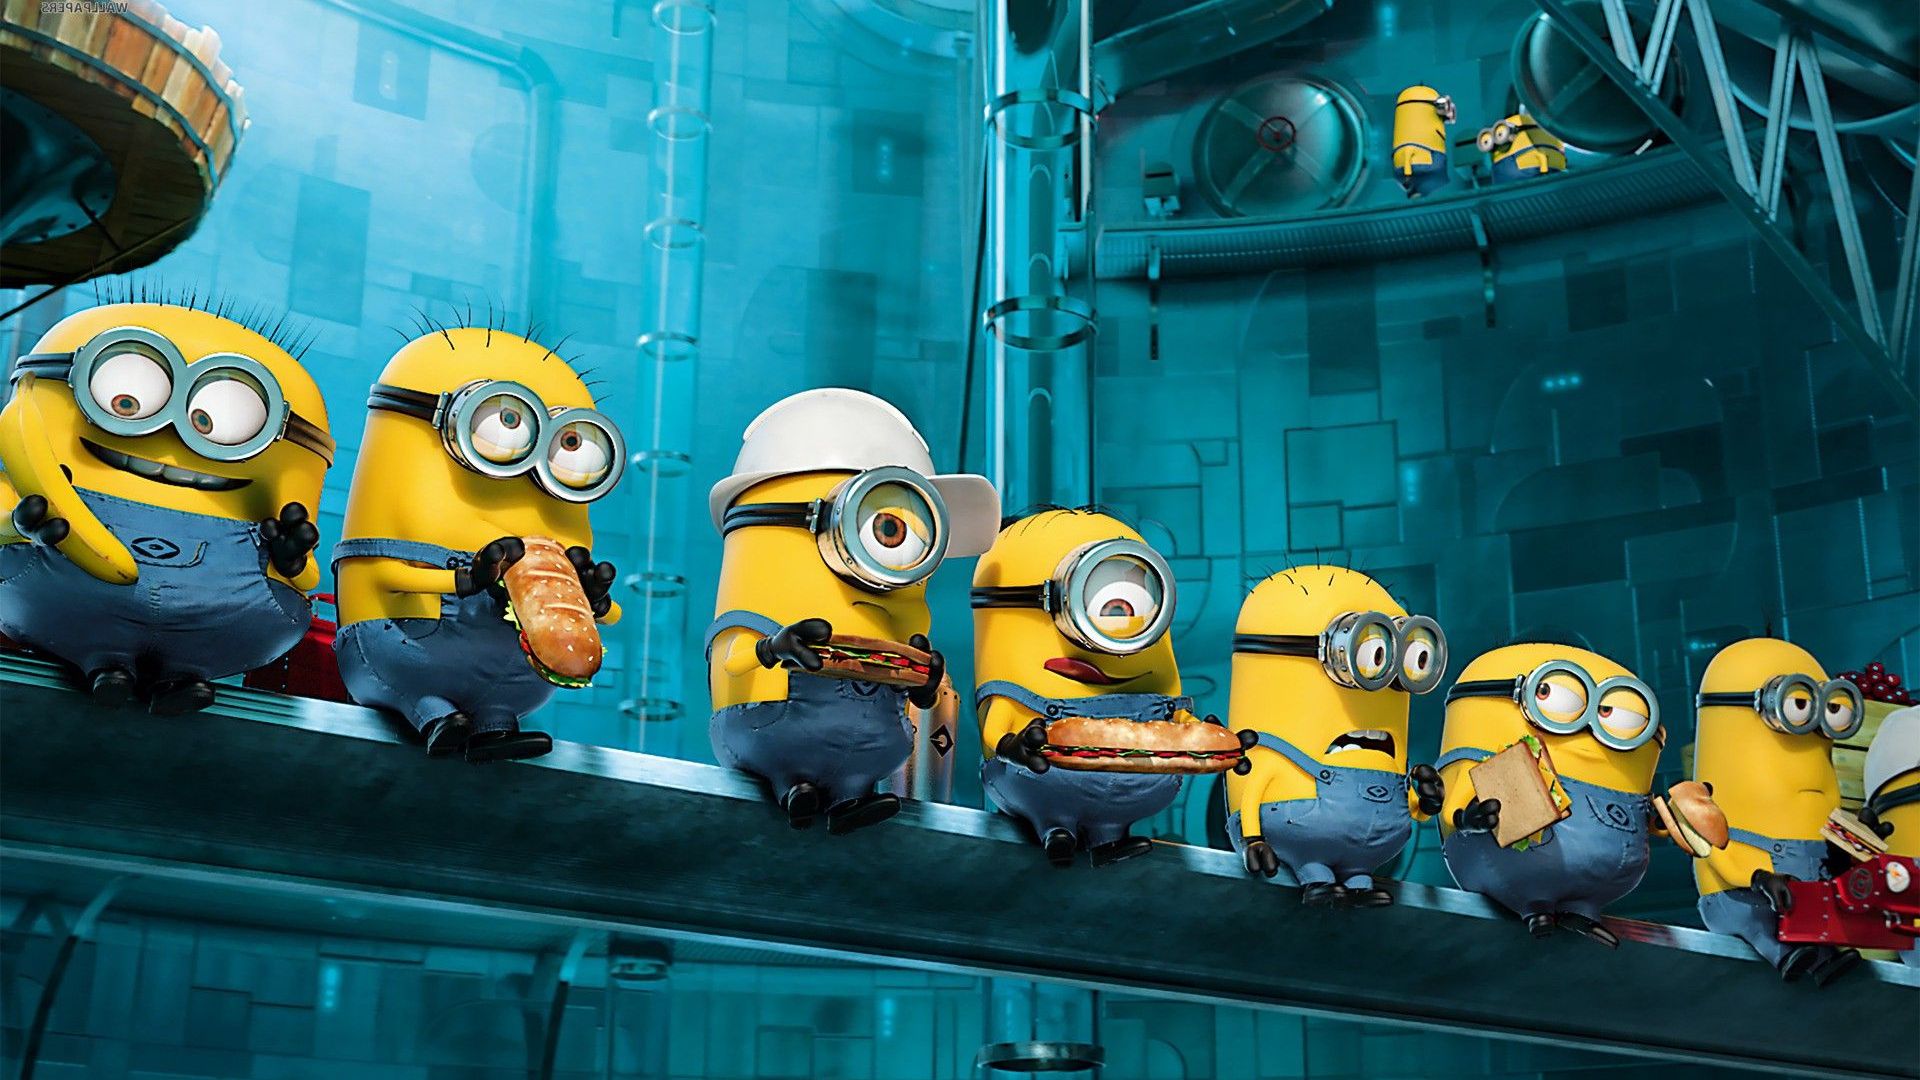 Minions at lunch Wallpaper 2248 1920x1080